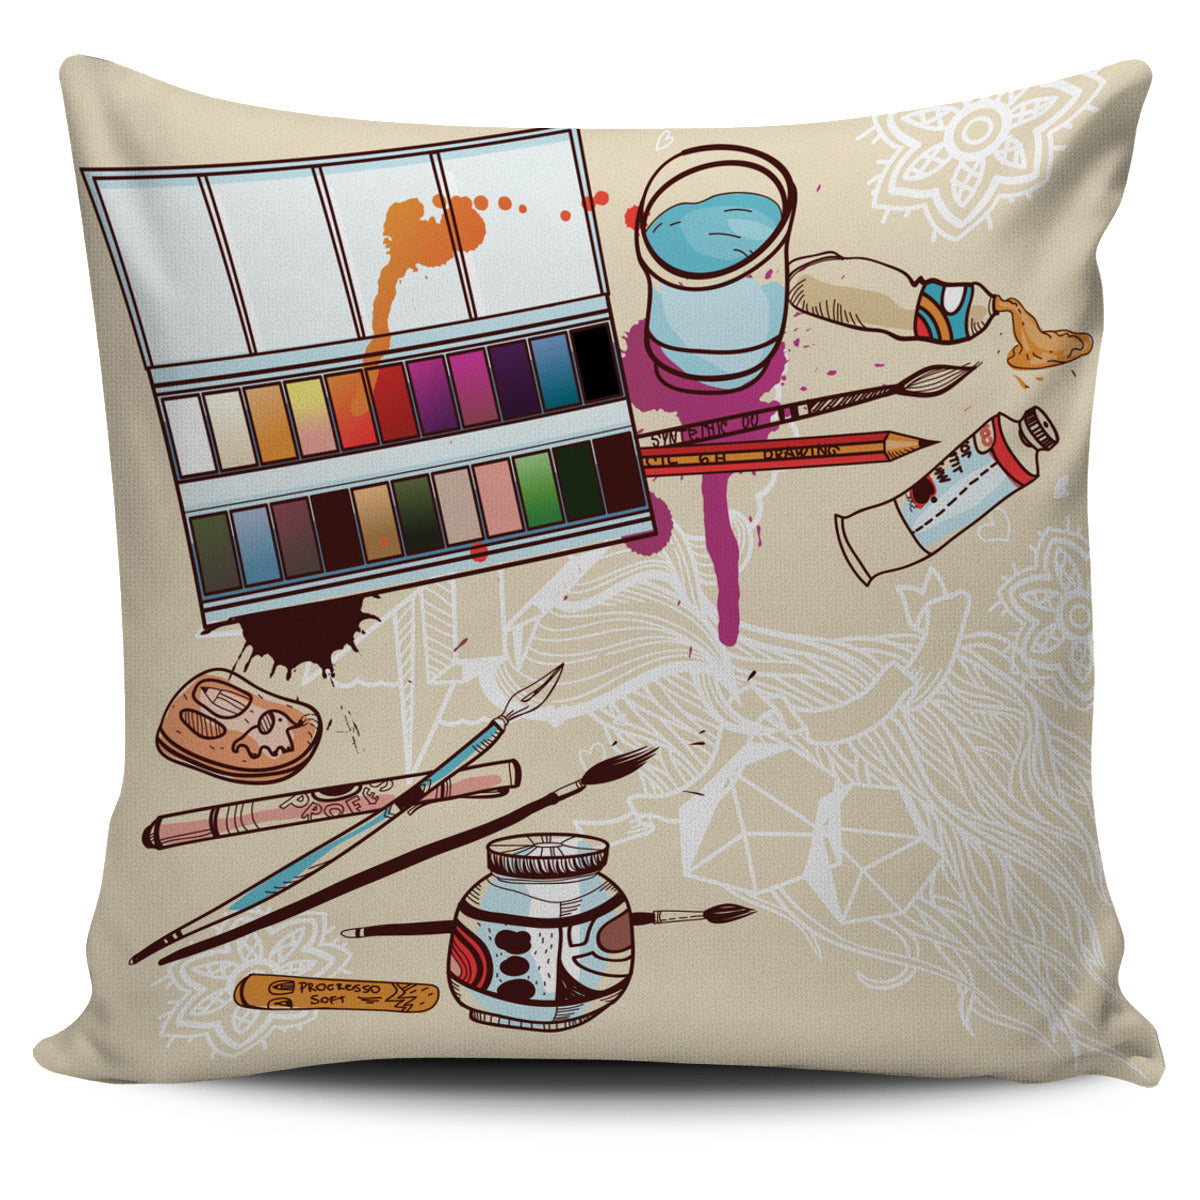 Artistic Tools Pillow Cover